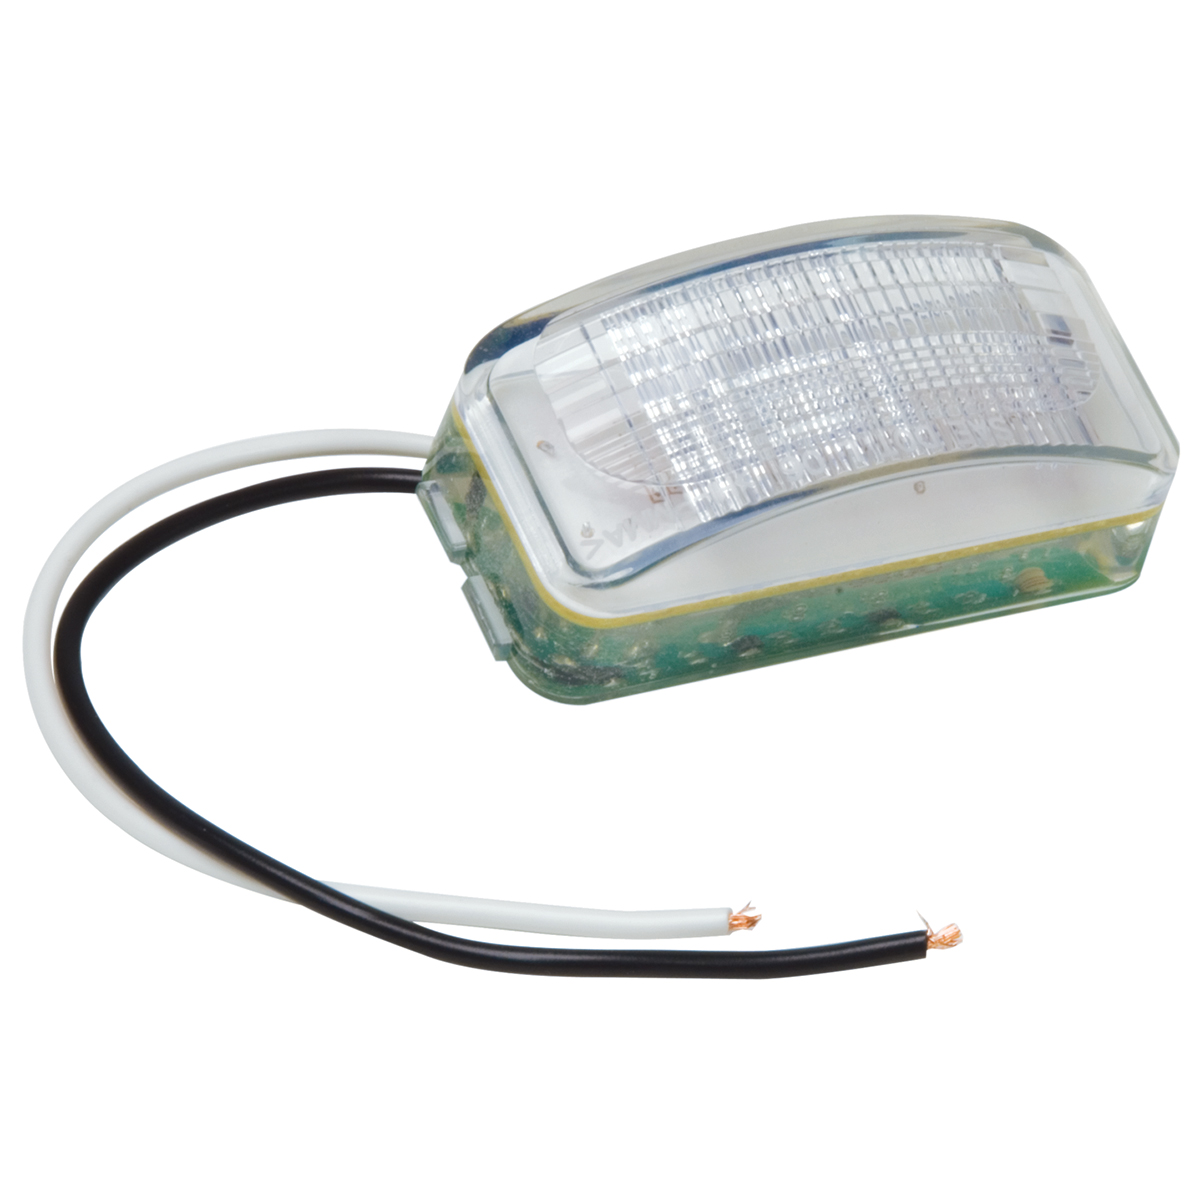 LED 2.5 .in SEALED RECT. LIC PLATE LIGH